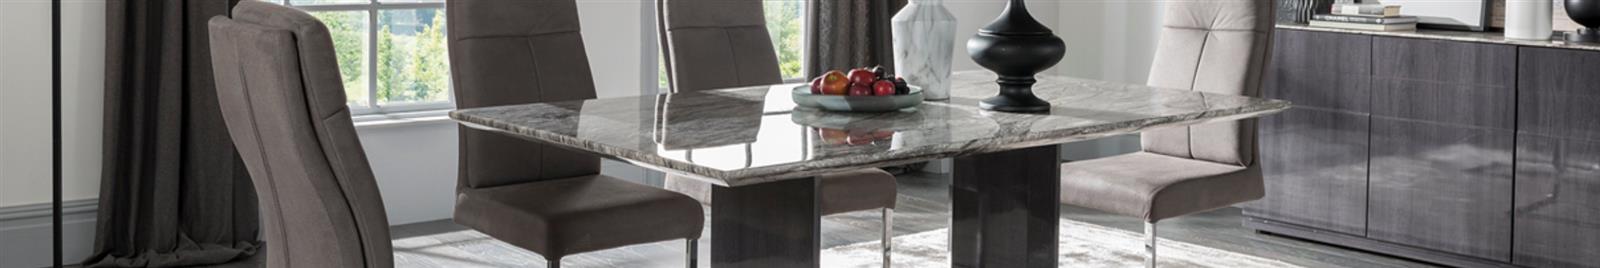 Donatella Collection - Modern Dining Room